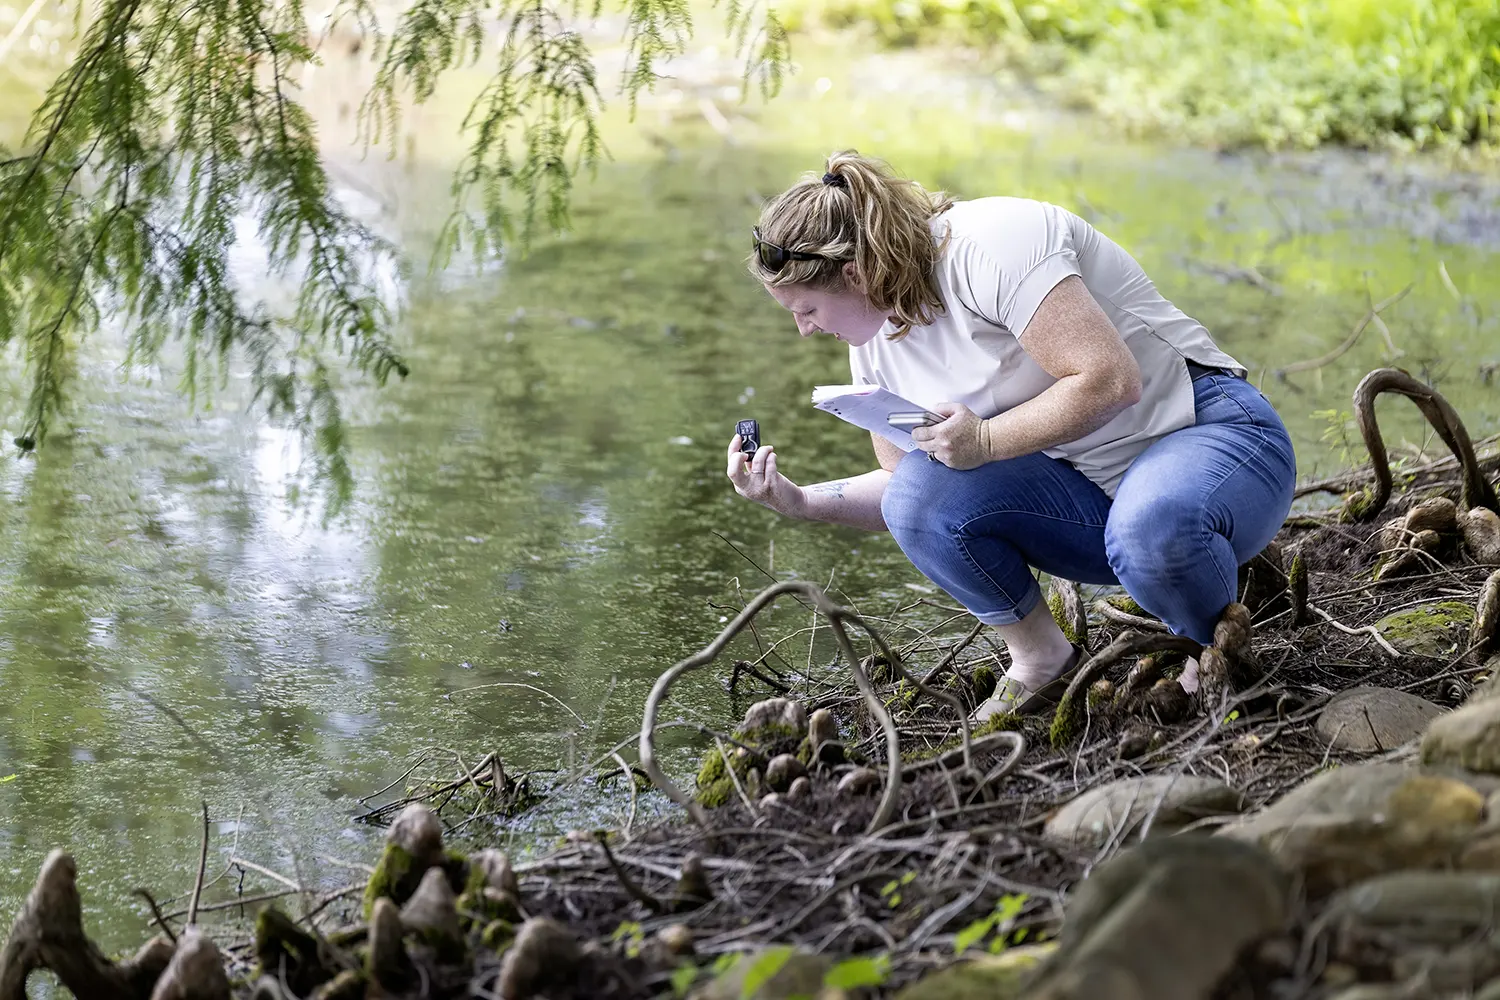 A K-12 educator collects a water sample during the Taking Teaching Outdoors professional development academy hosted by ORAU